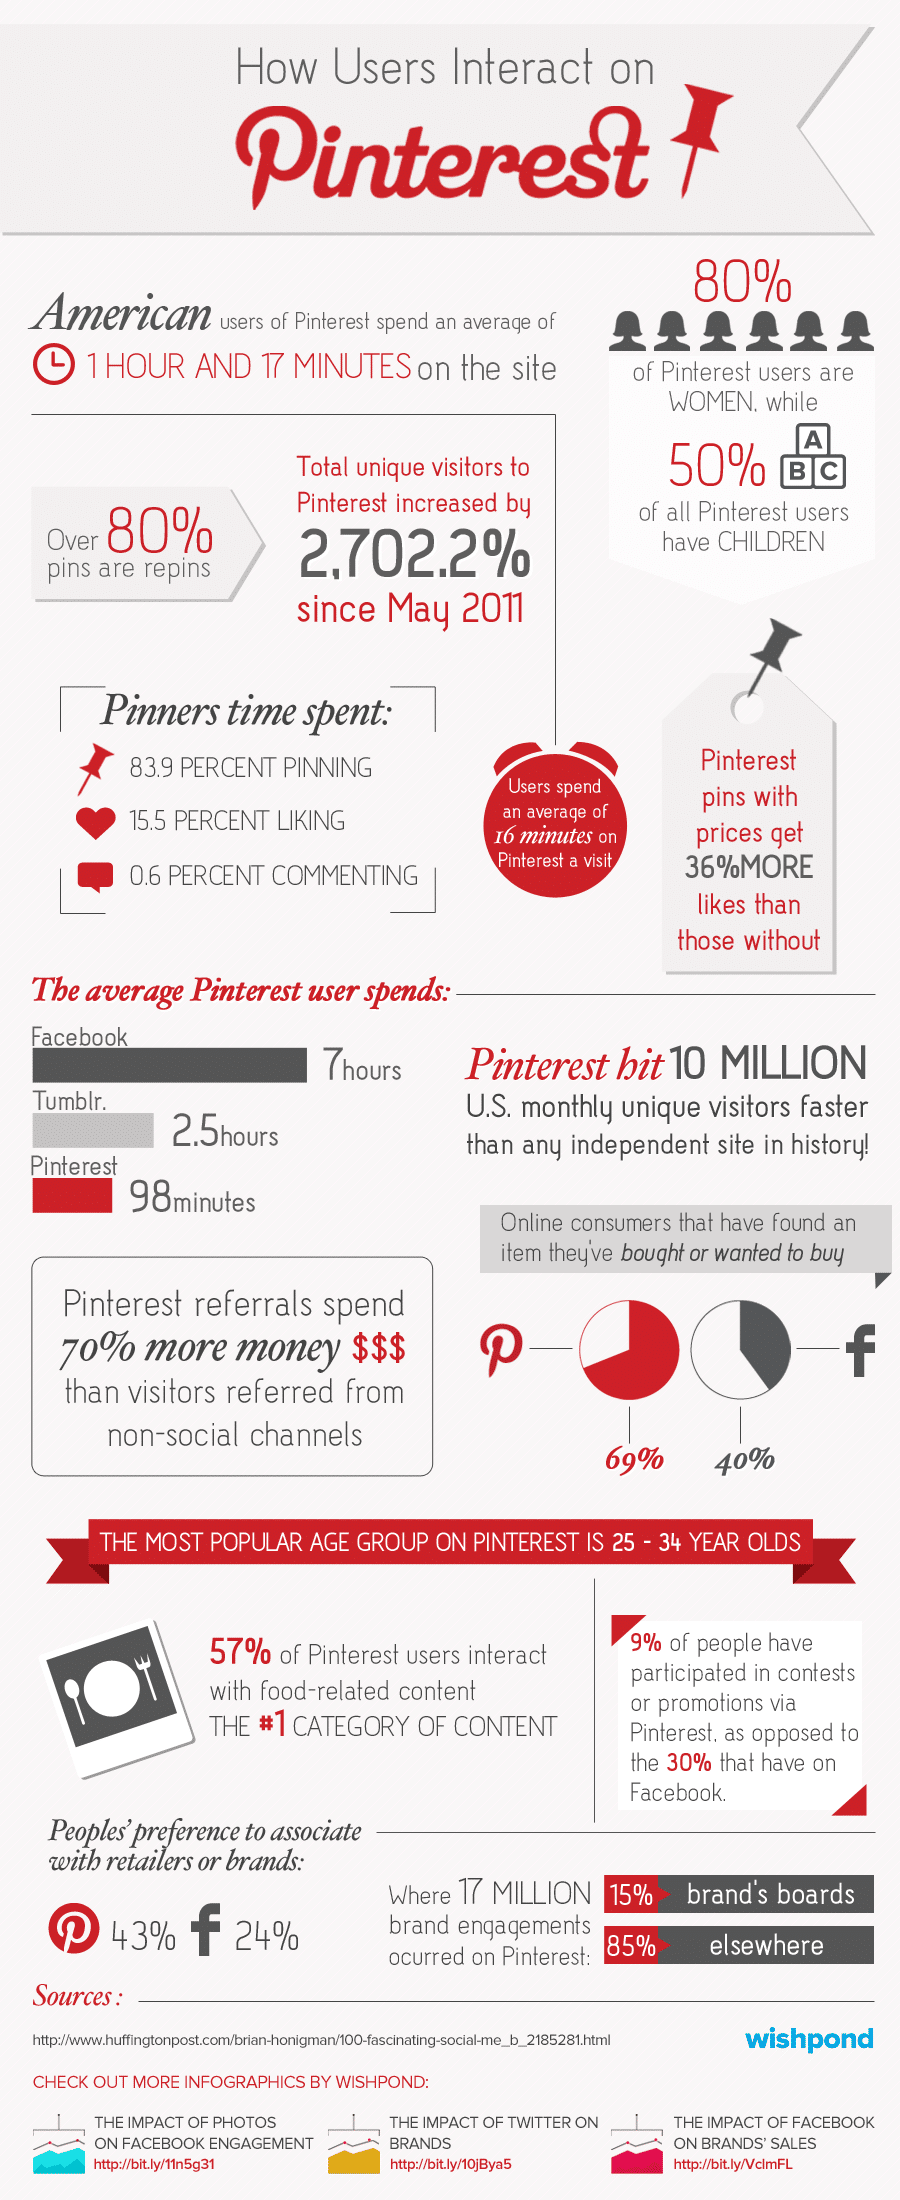 Pinterest Users & How They Interact [Infographic]